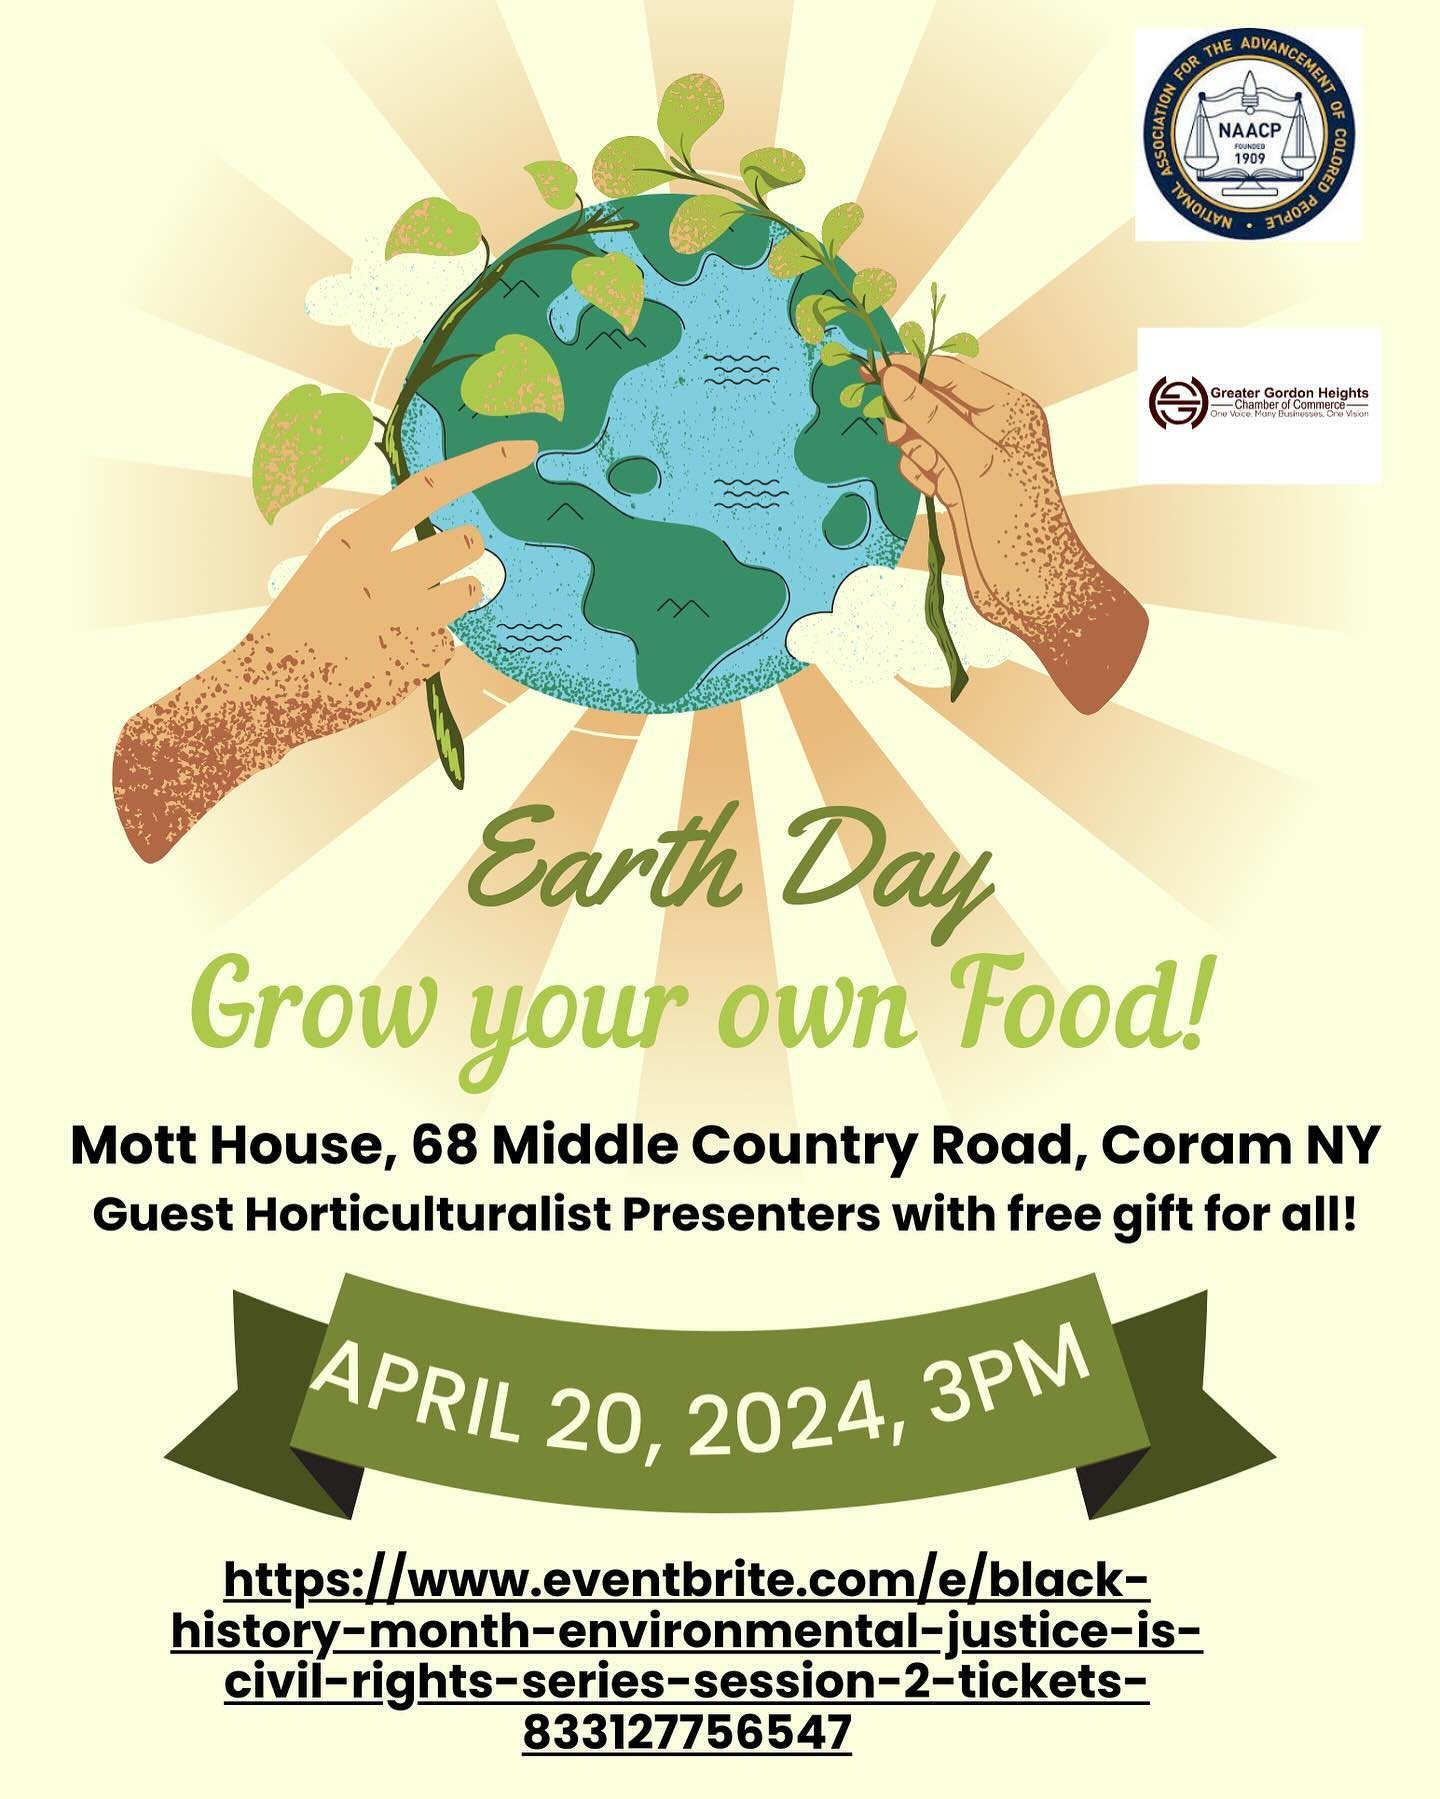 Earth Day is a day to celebrate!  We would love to celebrate with you!  Join us this Saturday, both BLARG and the Brookhaven NAACP are hosting two great events!